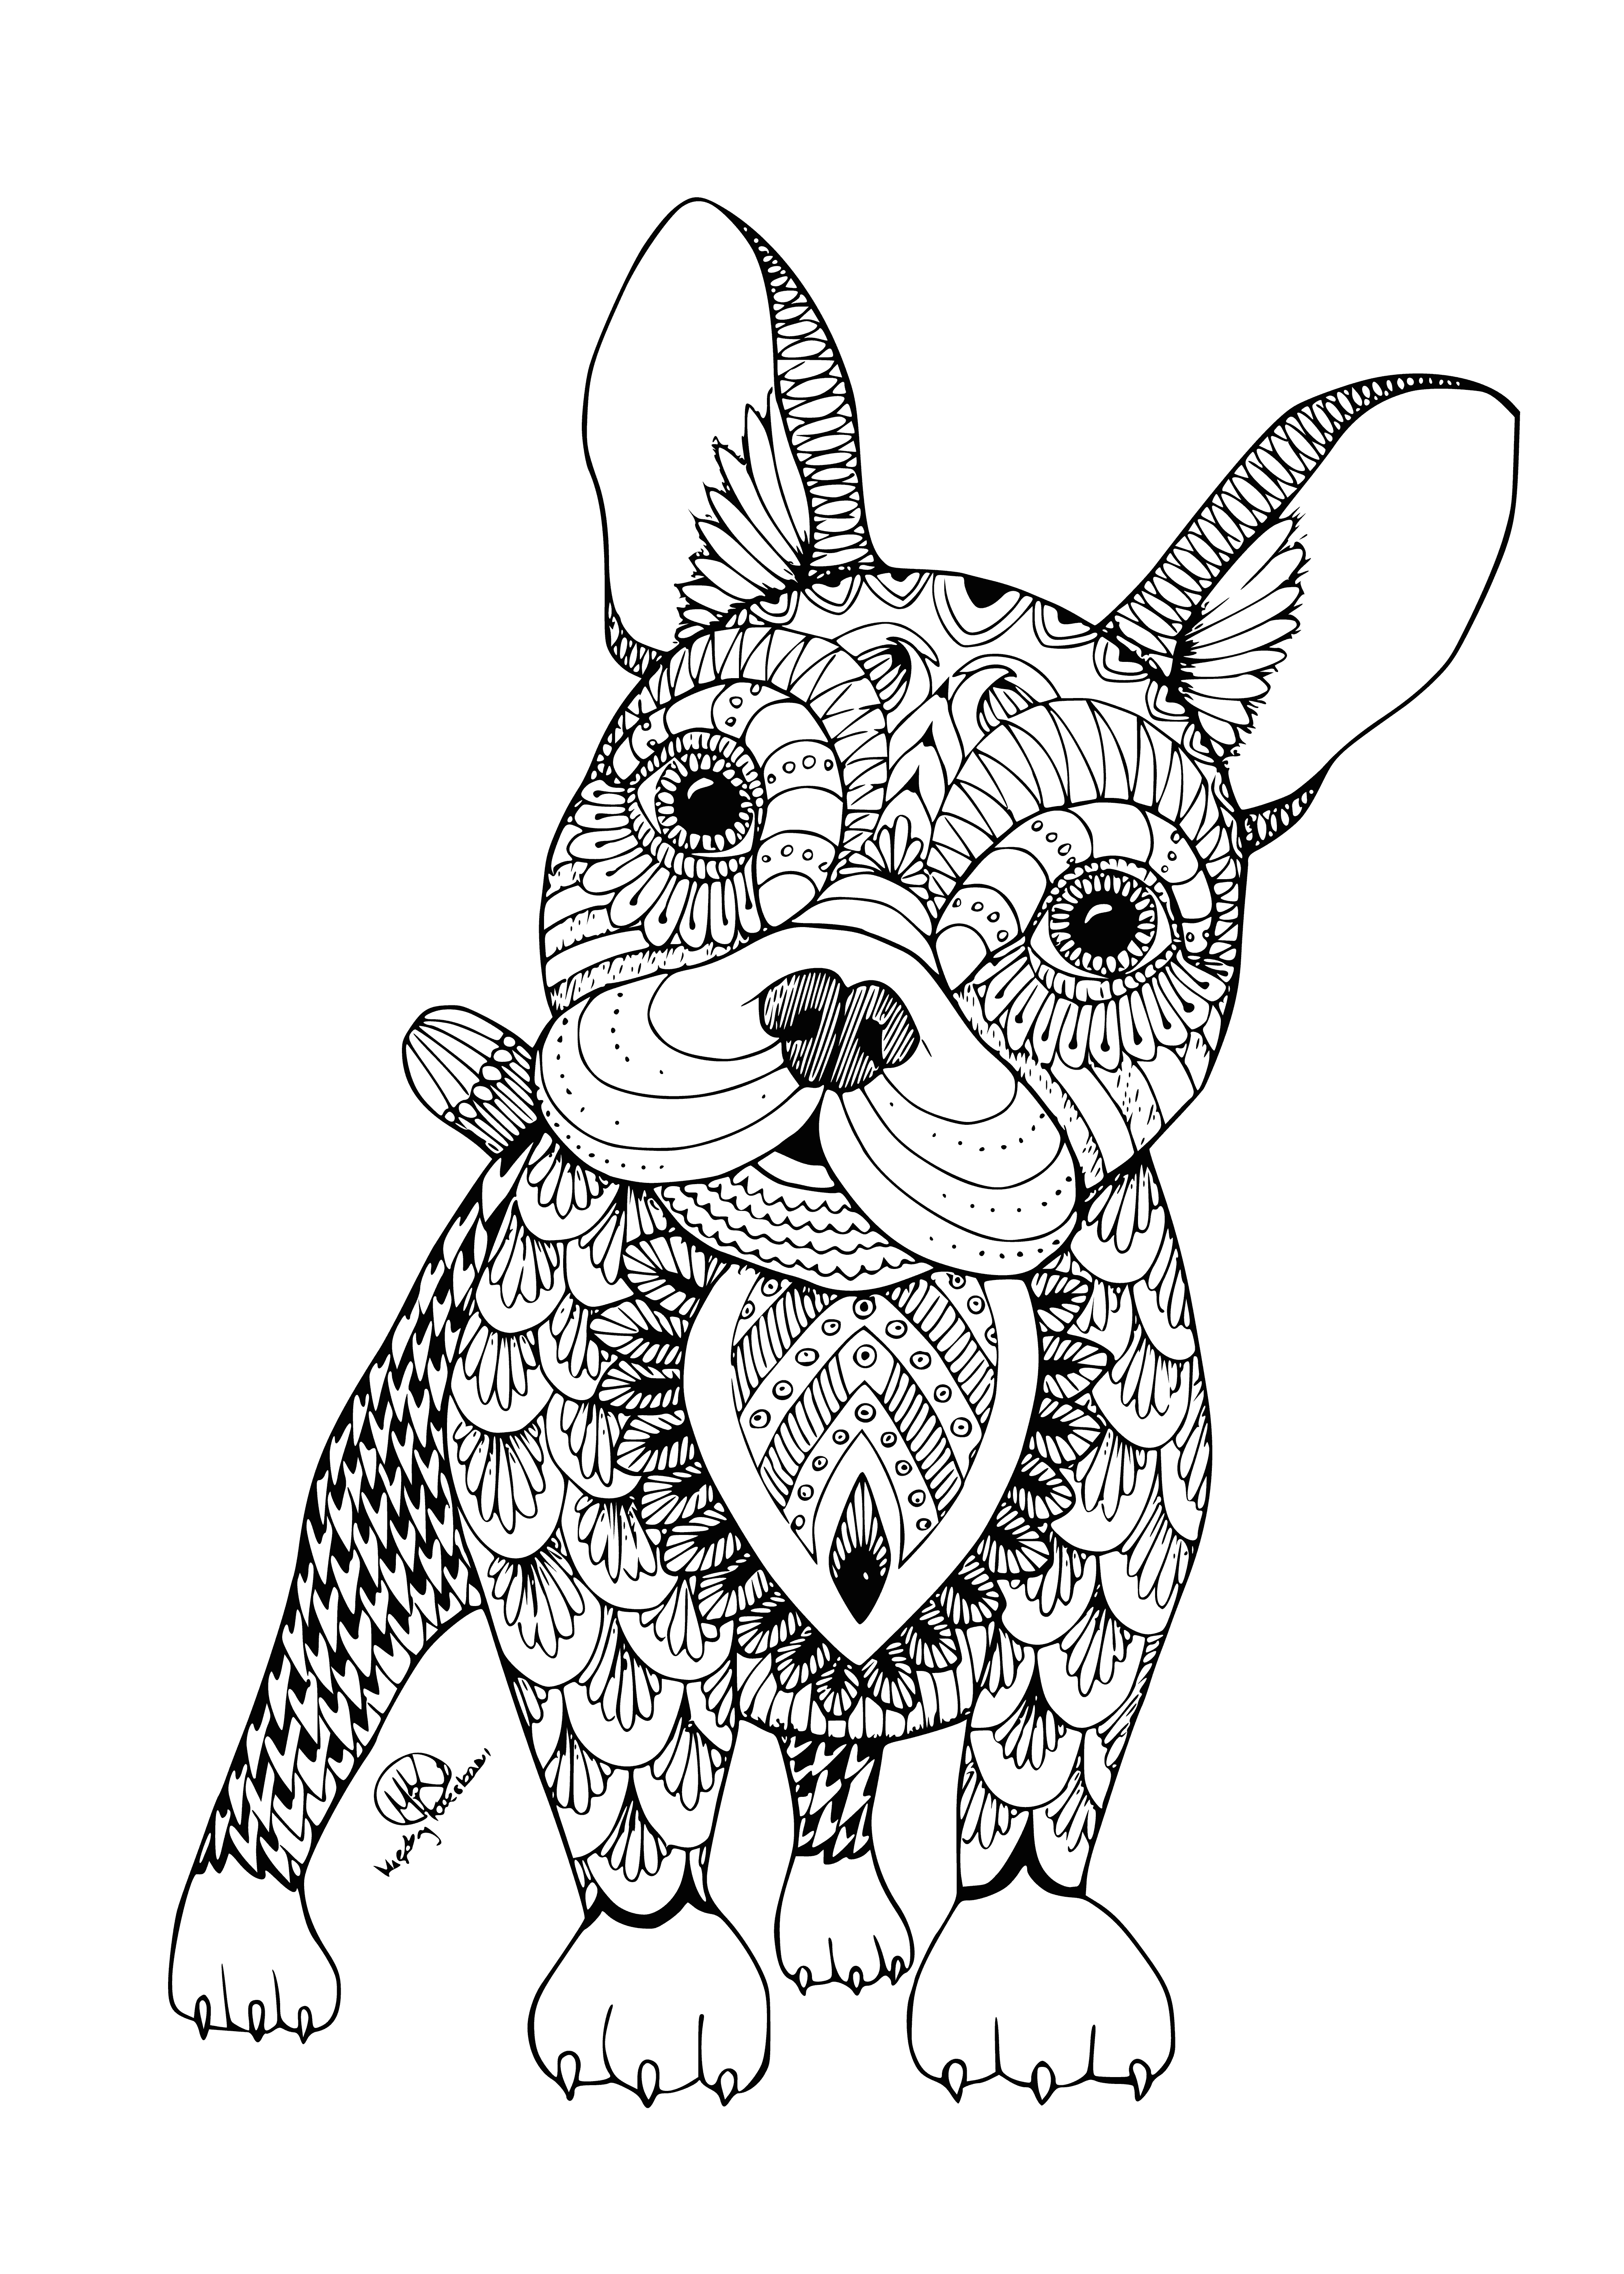 coloring page: Line art drawing of a French Bulldog, sitting with closed eyes, tongue out, large nose, floppy ears, stocky body & short tail.